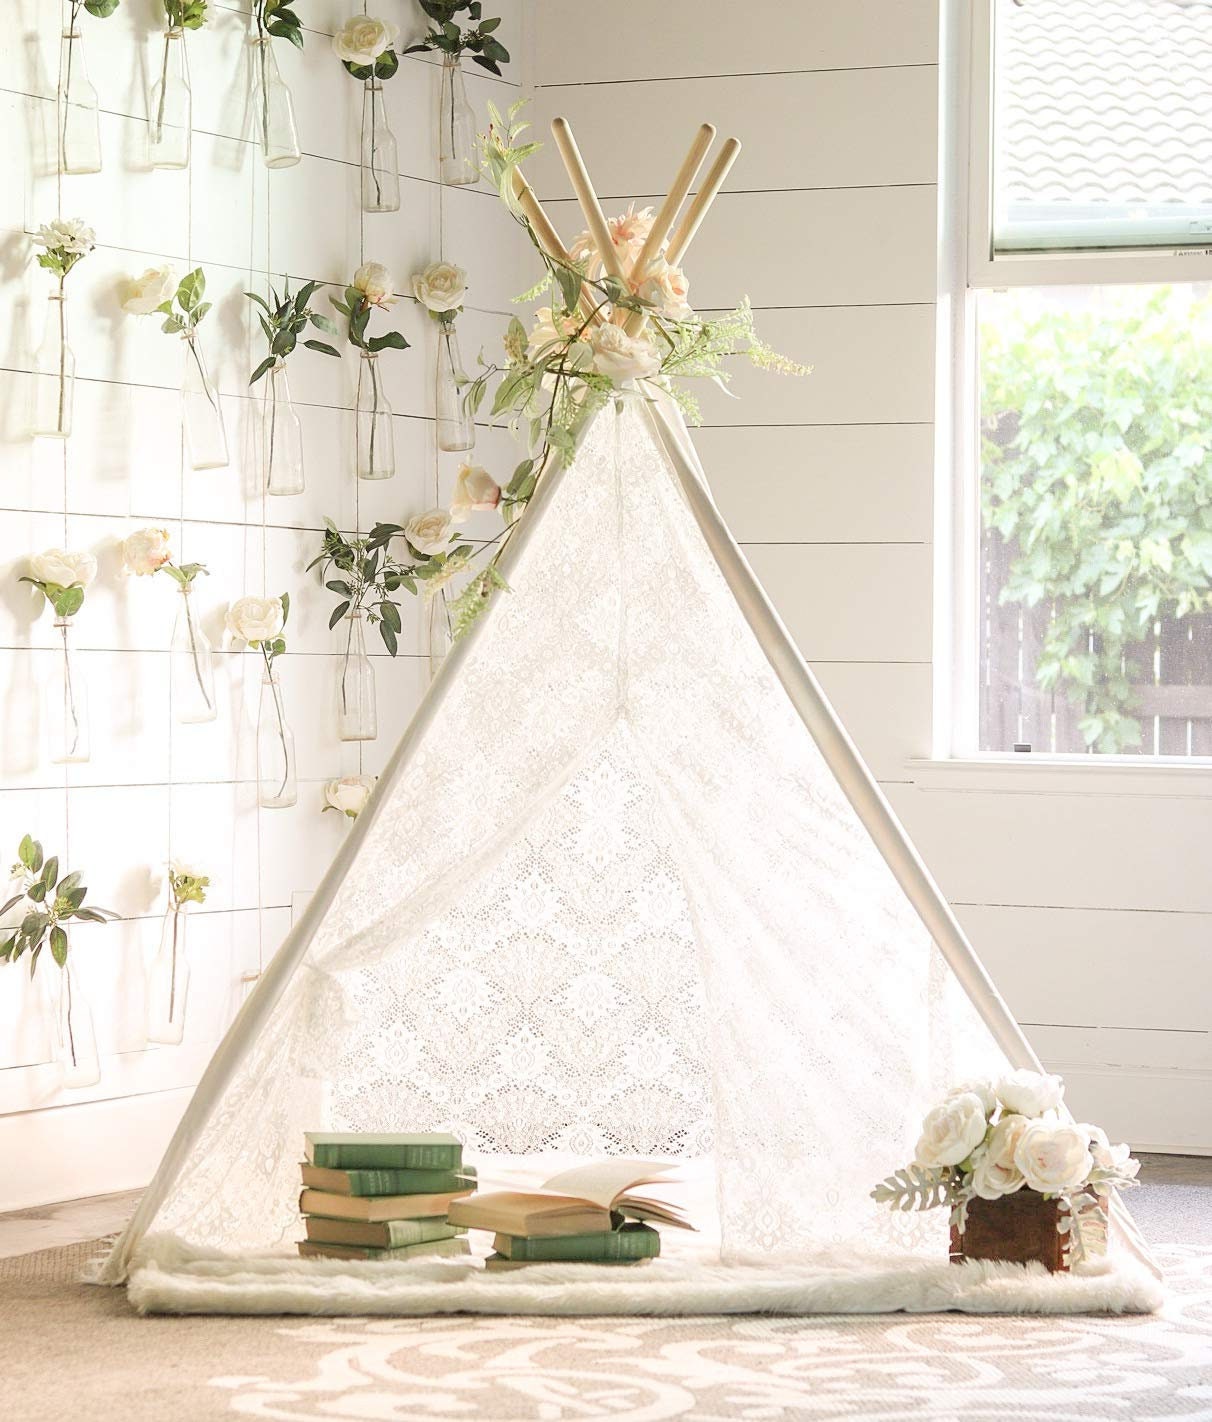 Indian Playhouse Toy Teepee Play Tent for Kid Holiday creative gift for Children Foldable Play Tent Portable Kids Tent White Lace Teepee 3p